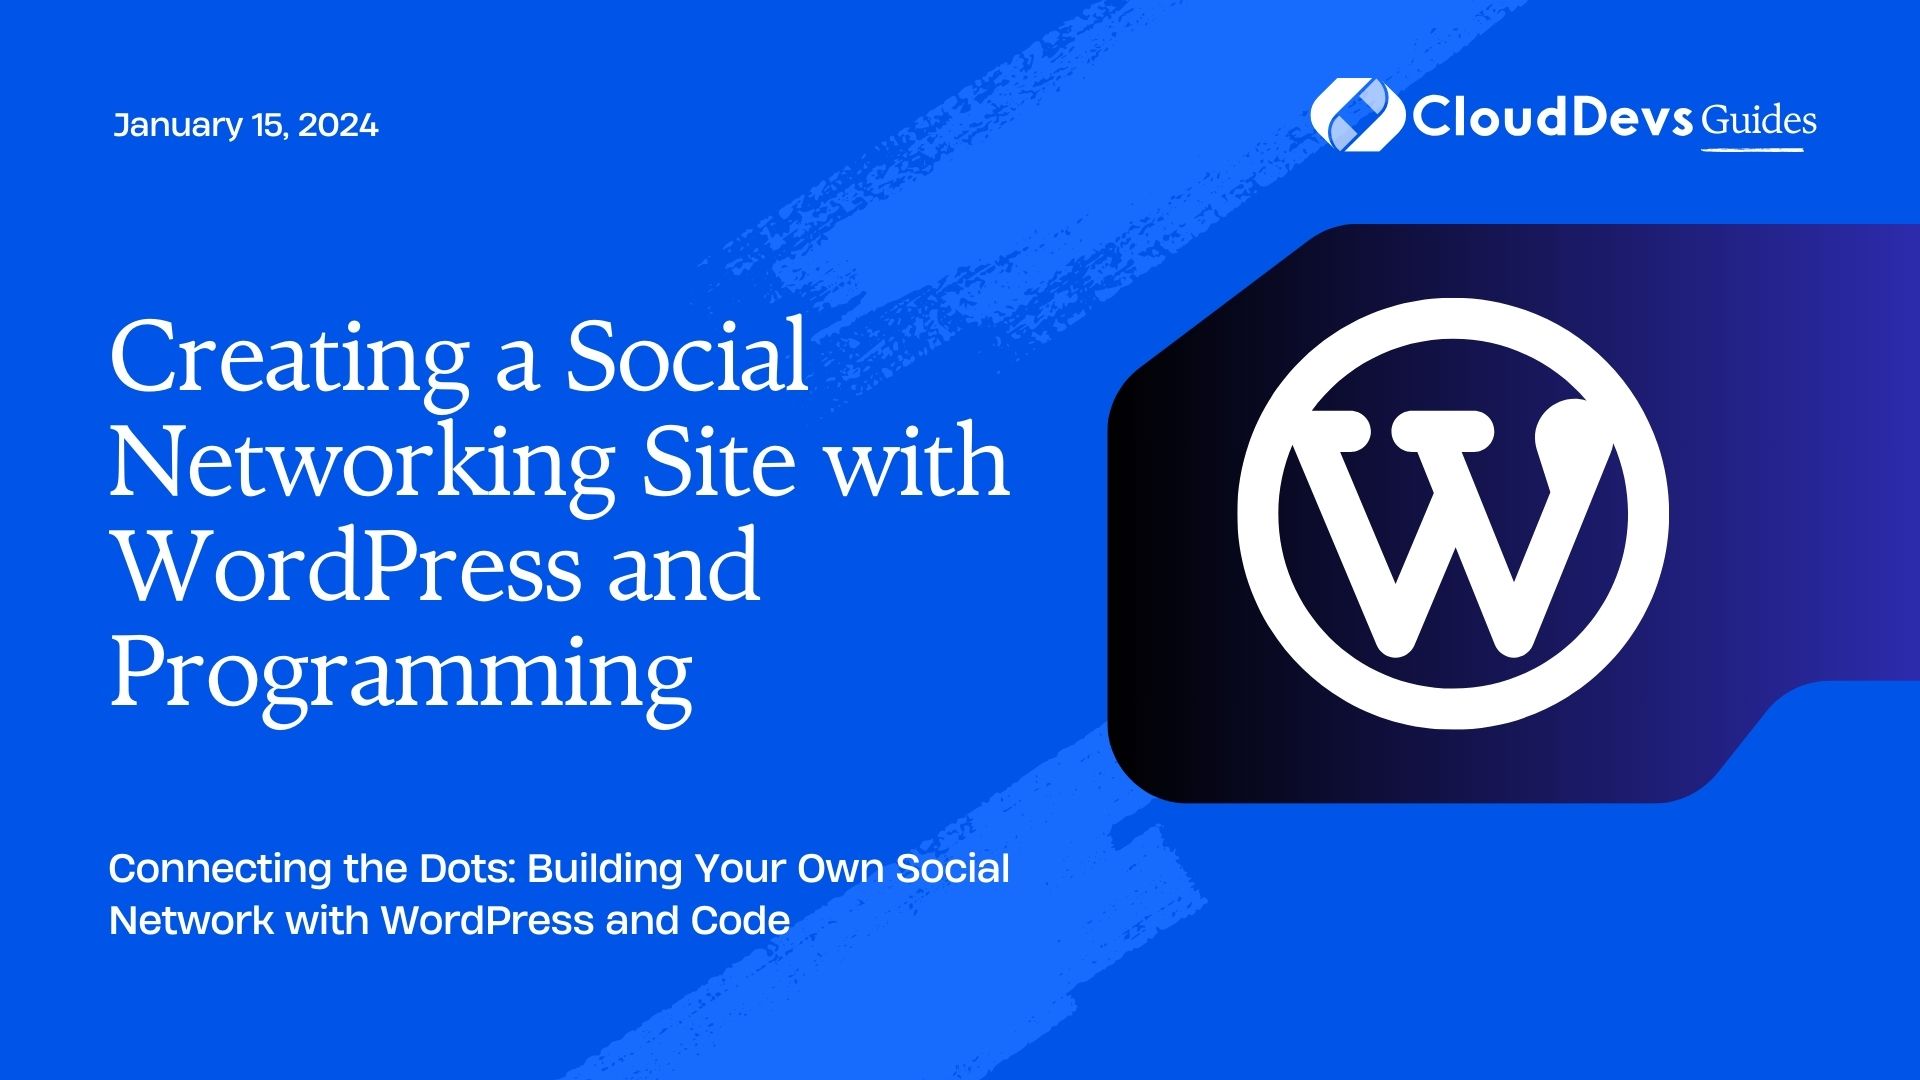 Creating a Social Networking Site with WordPress and Programming